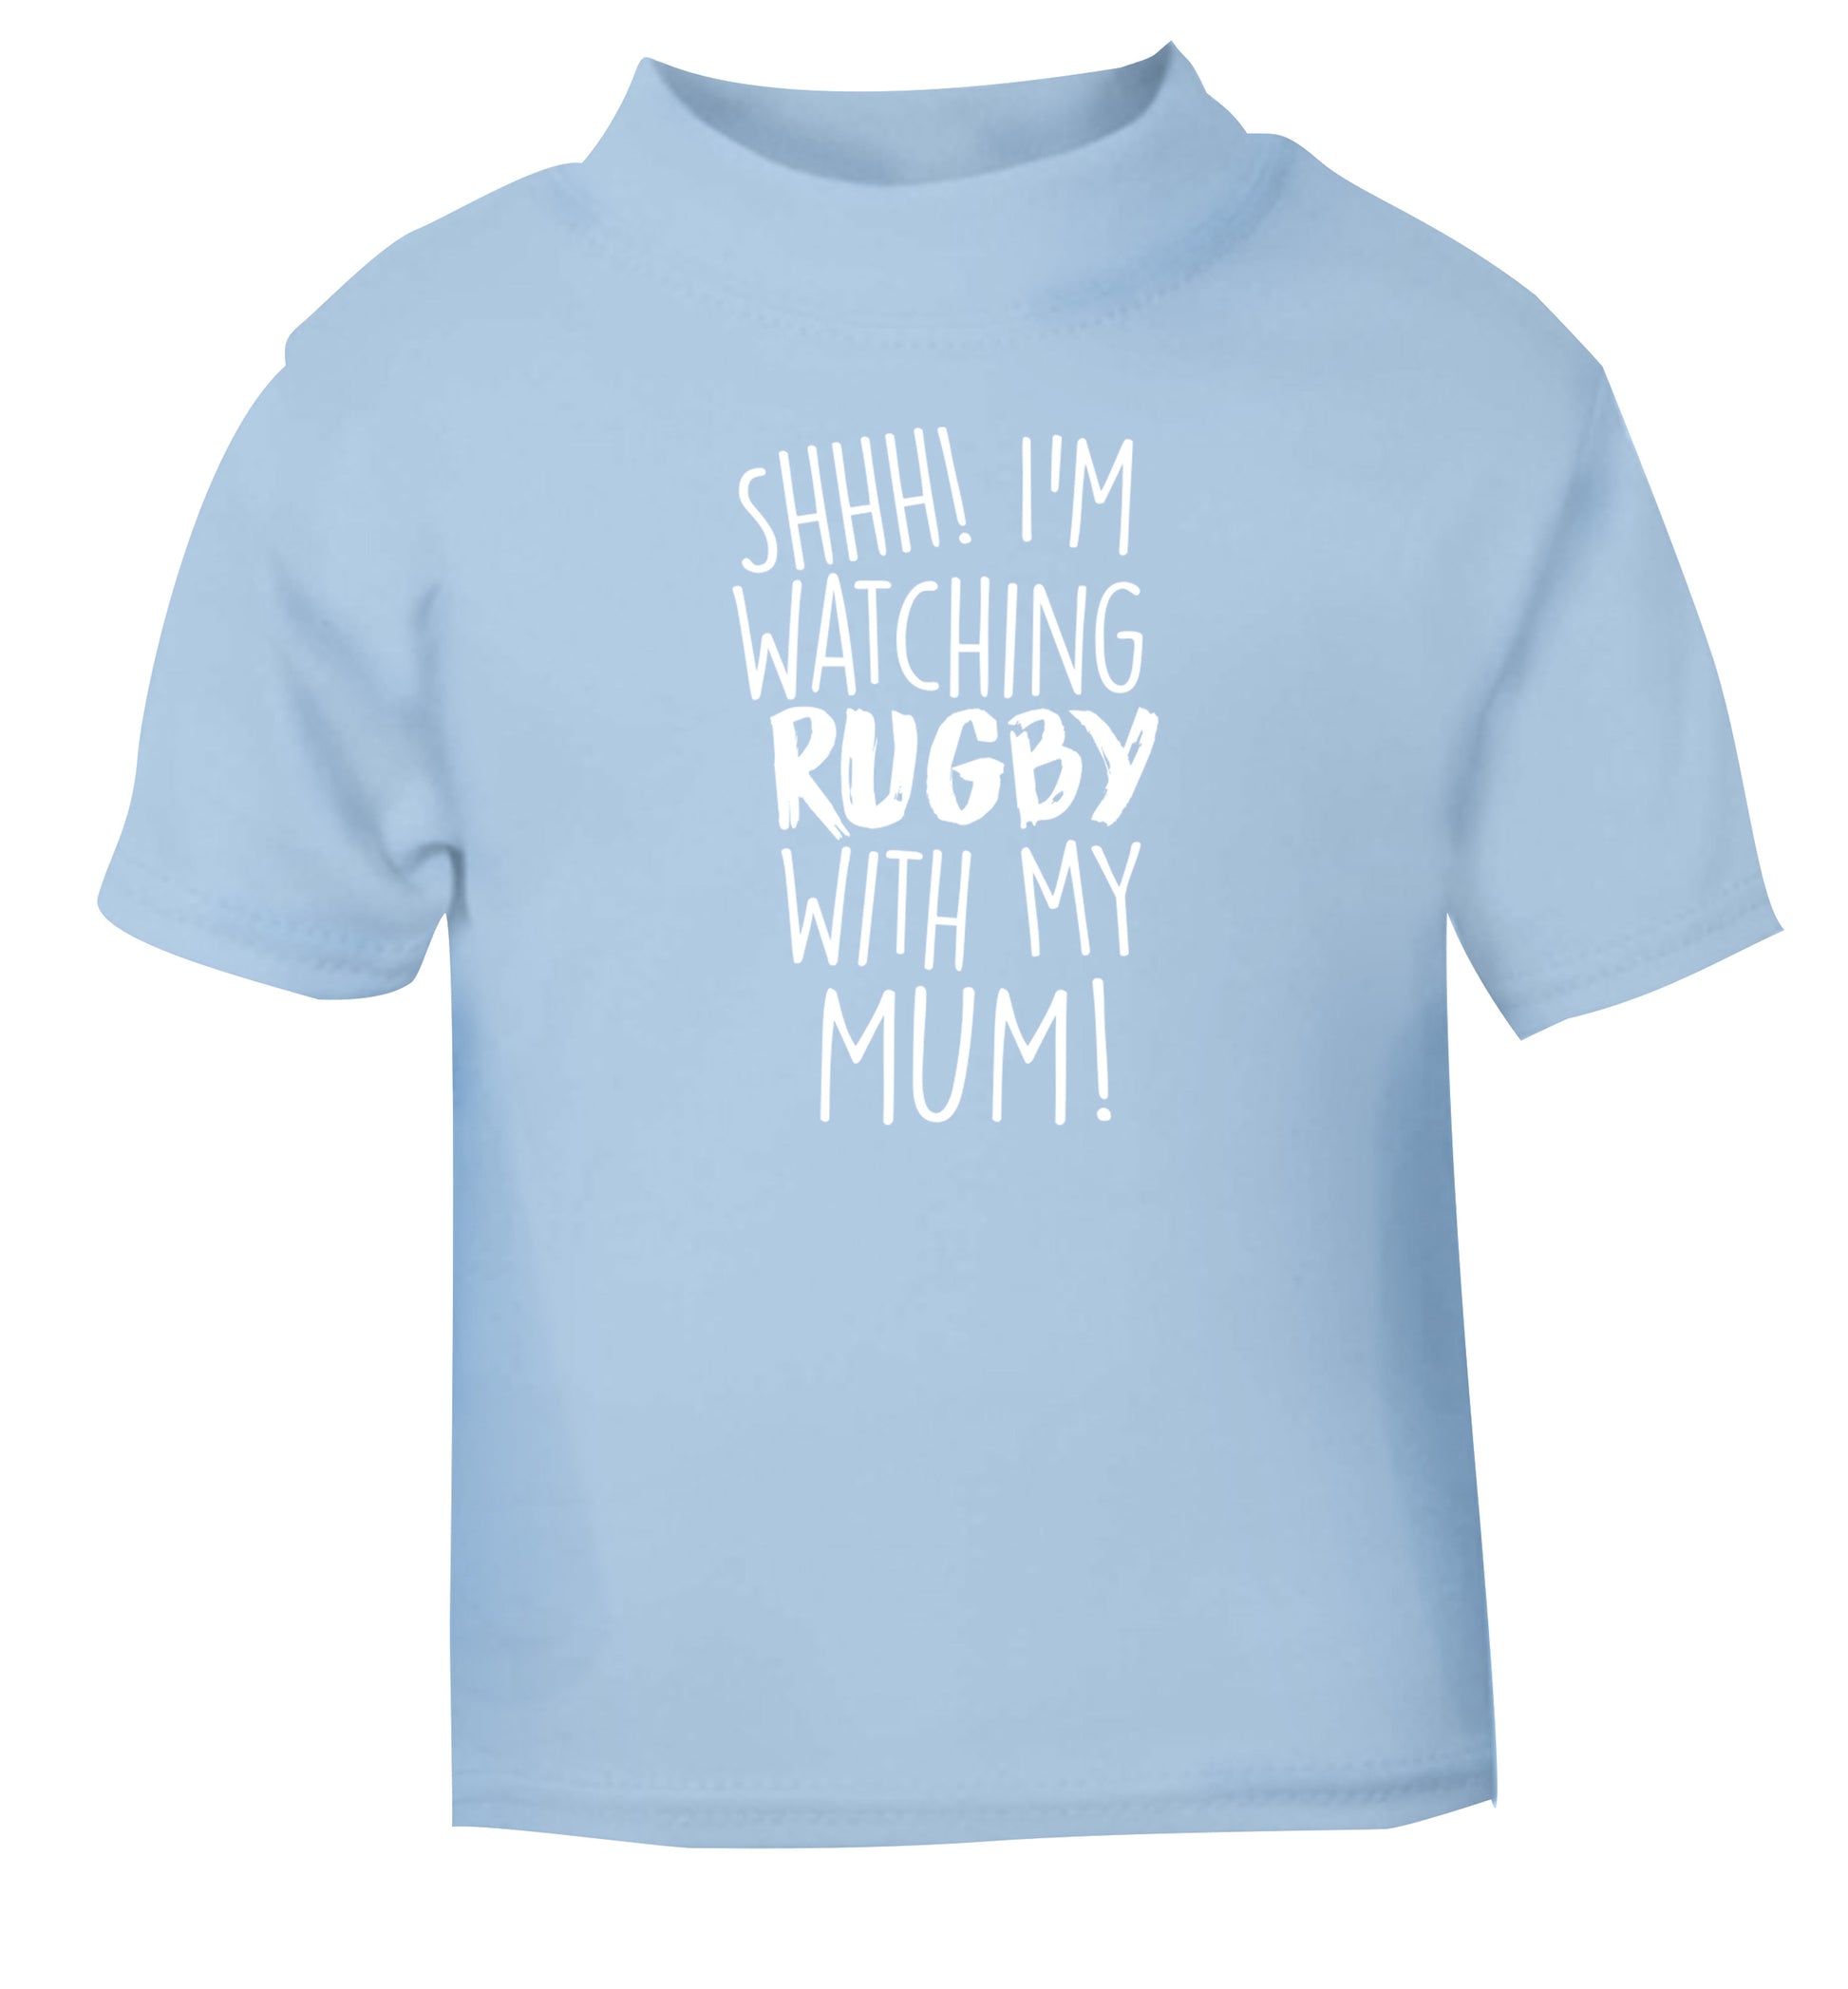 Shh... I'm watching rugby with my mum light blue Baby Toddler Tshirt 2 Years